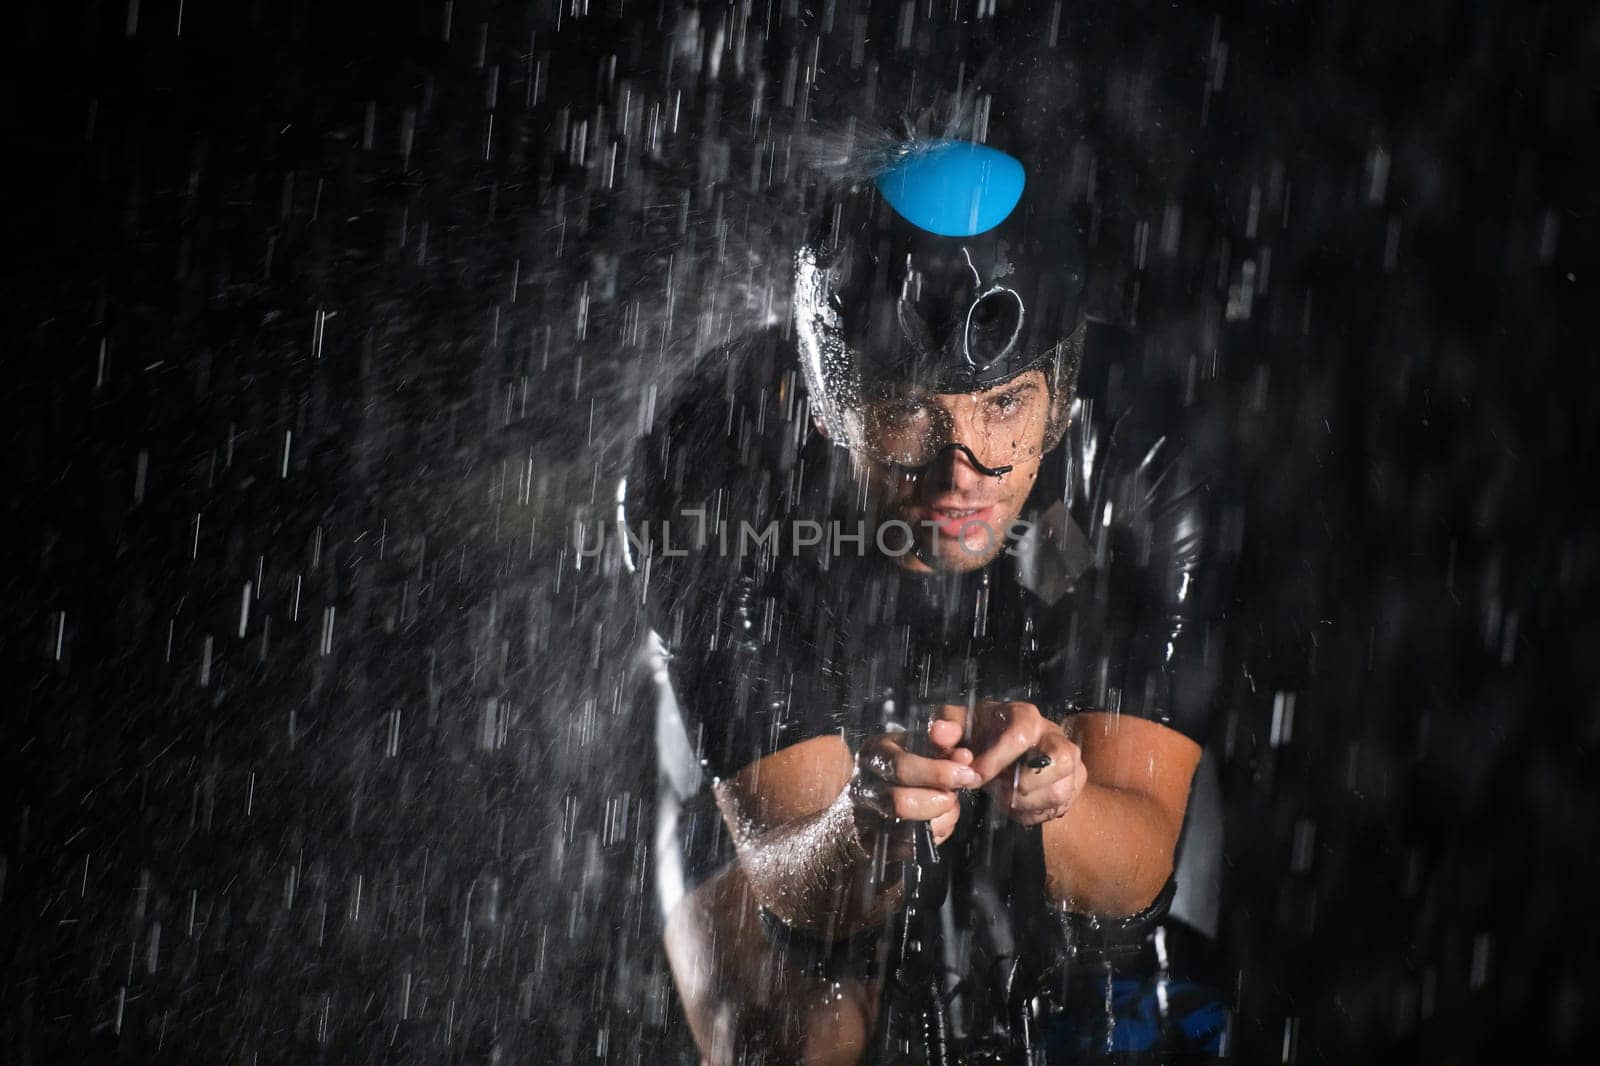 A triathlete braving the rain as he cycles through the night, preparing himself for the upcoming marathon. The blurred raindrops in the foreground and the dark, moody atmosphere in the background add to the sense of determination and grit shown by the athlete